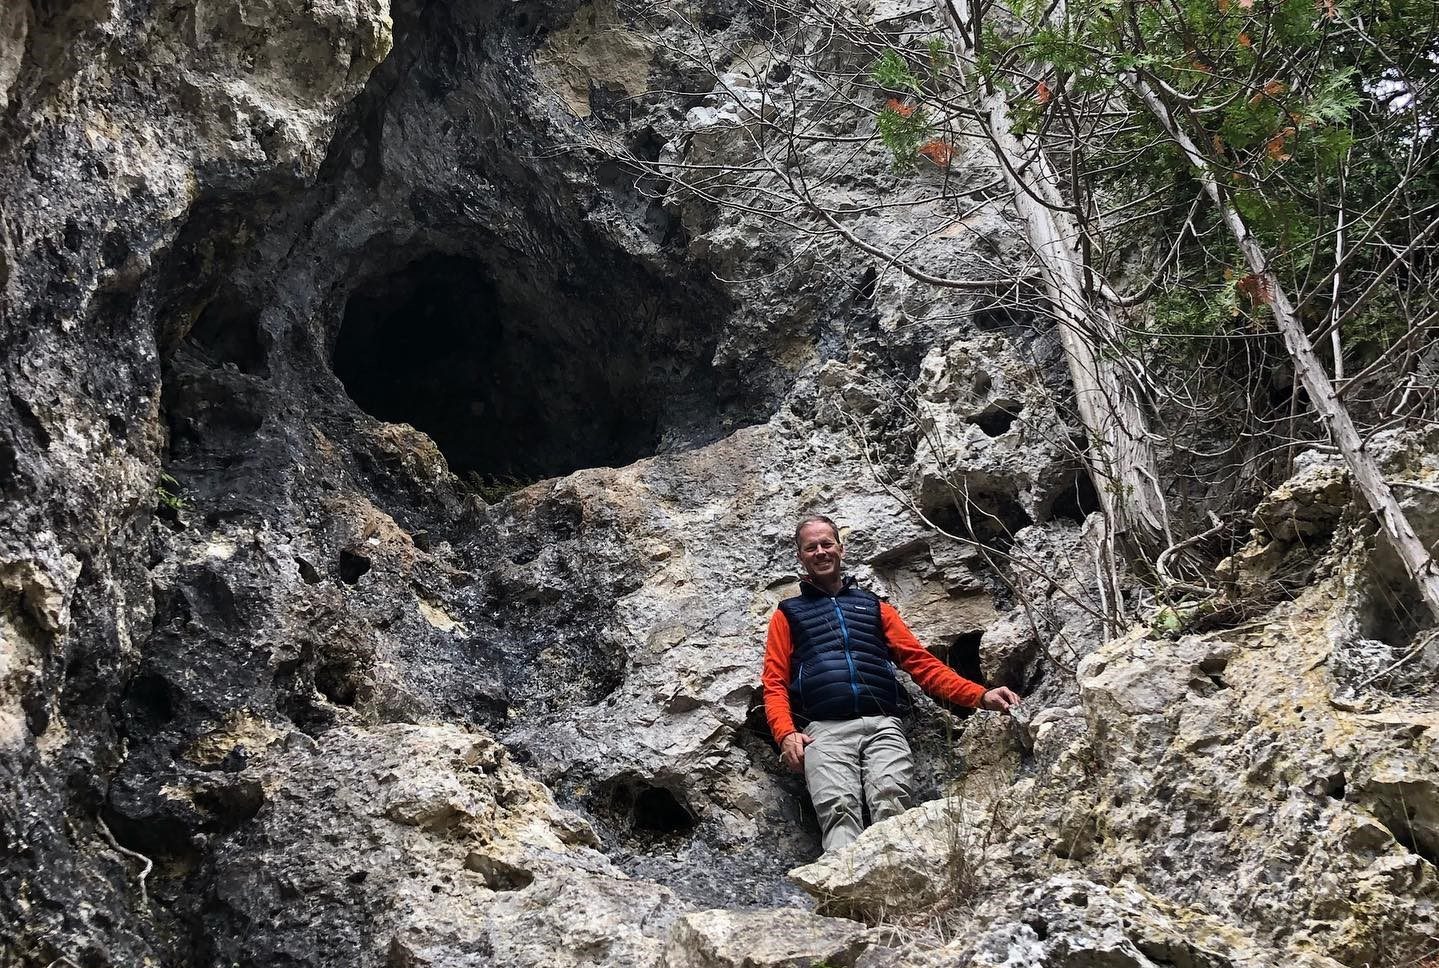 A man stands on a rock face below a cave opening on Mackinac Island